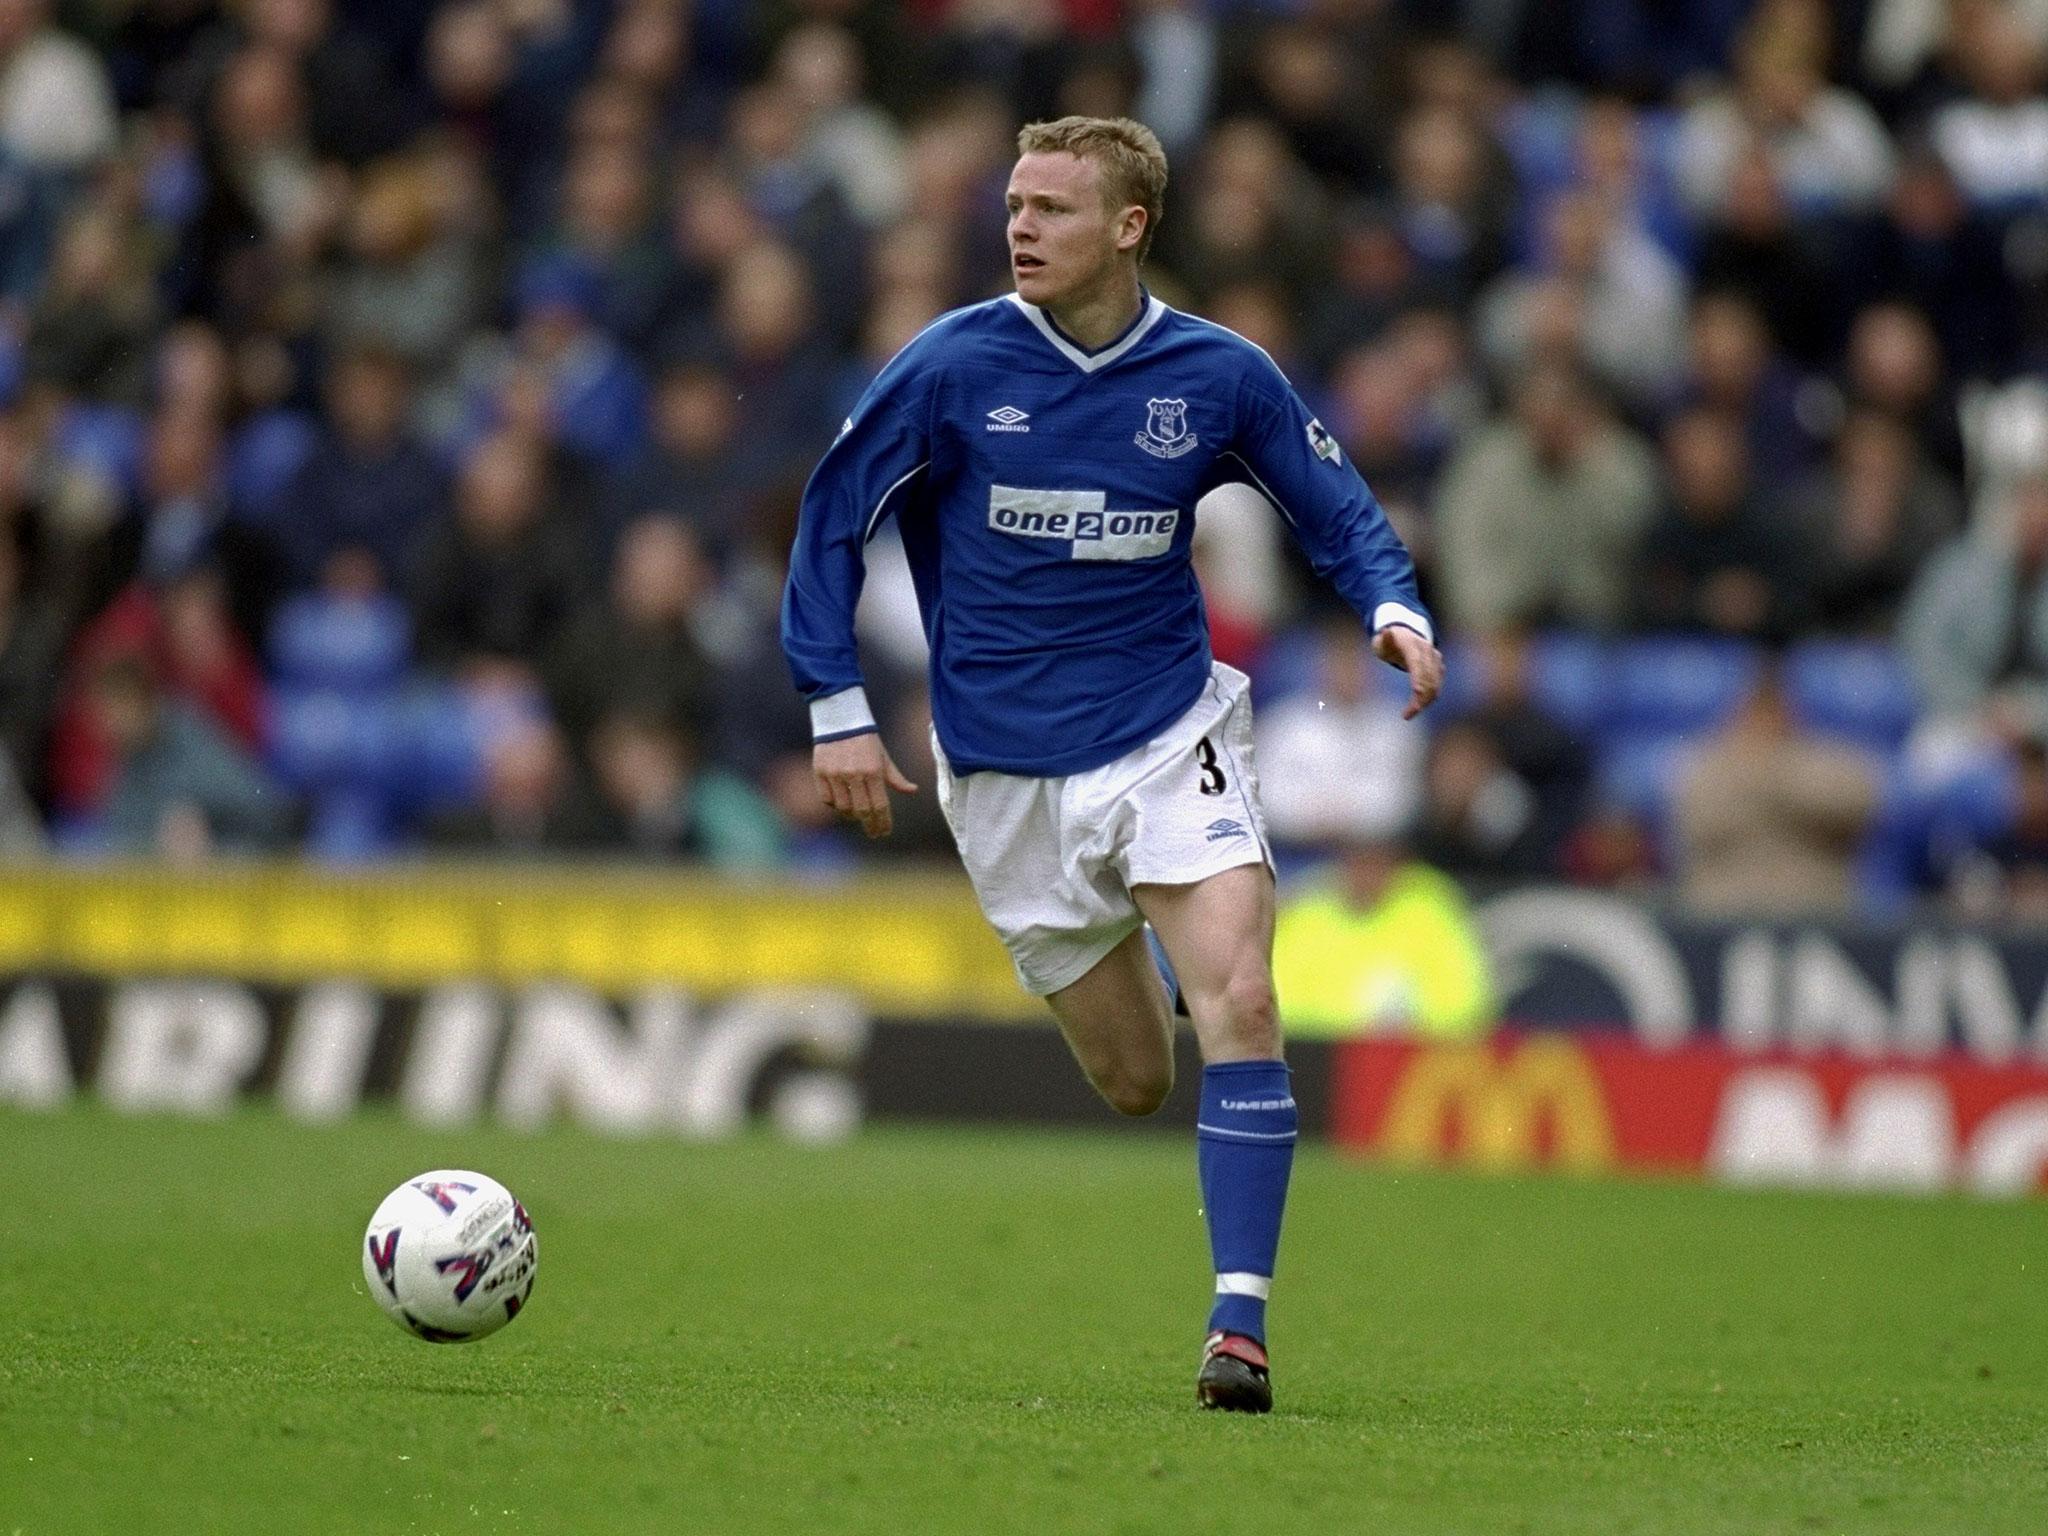 Michael Ball in action for Everton during his playing days